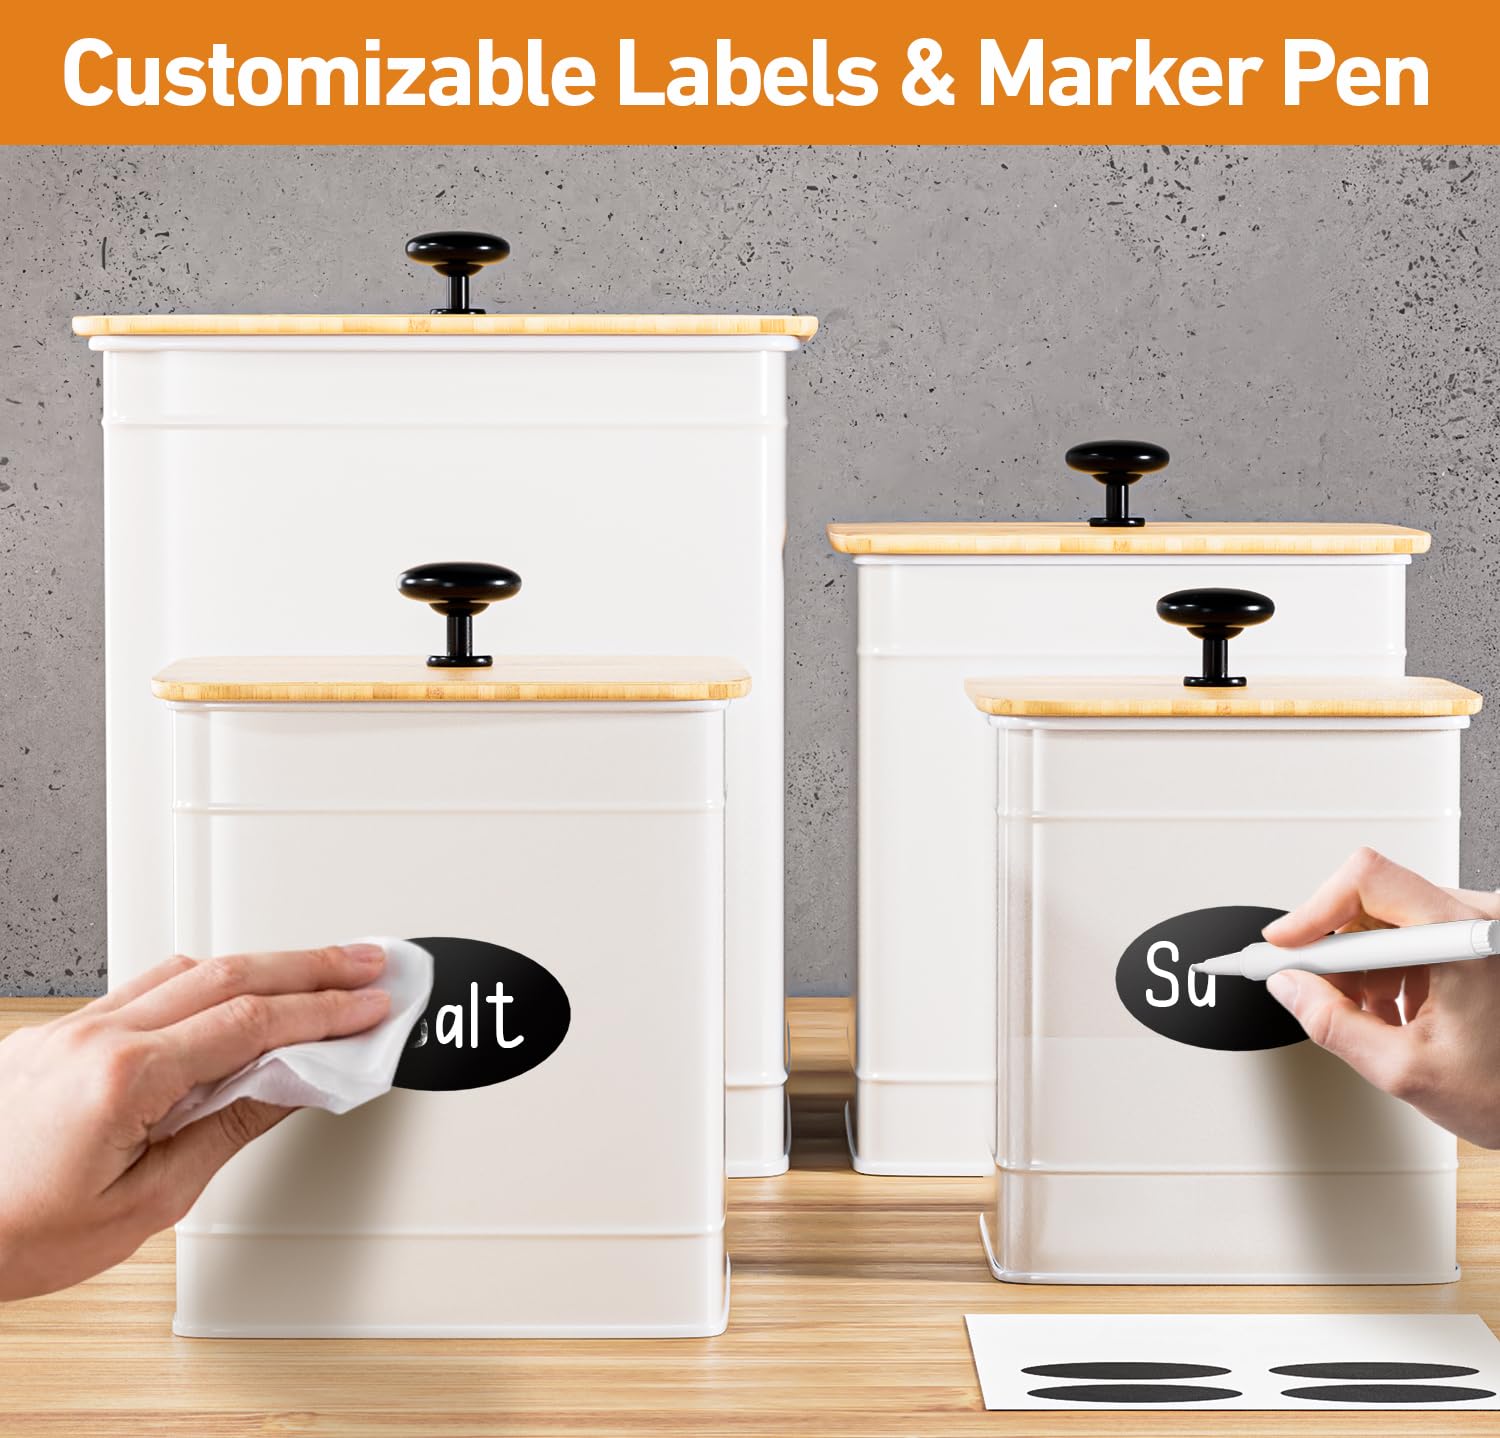 Kitchen Canisters for Countertop Set of 4 with Customizable Chalkboard Labels & Marker Pen - Big Iron Kitchen Canisters with Airtight Lids - Canisters Sets for the Kitchen - White Kitchen Canister Set